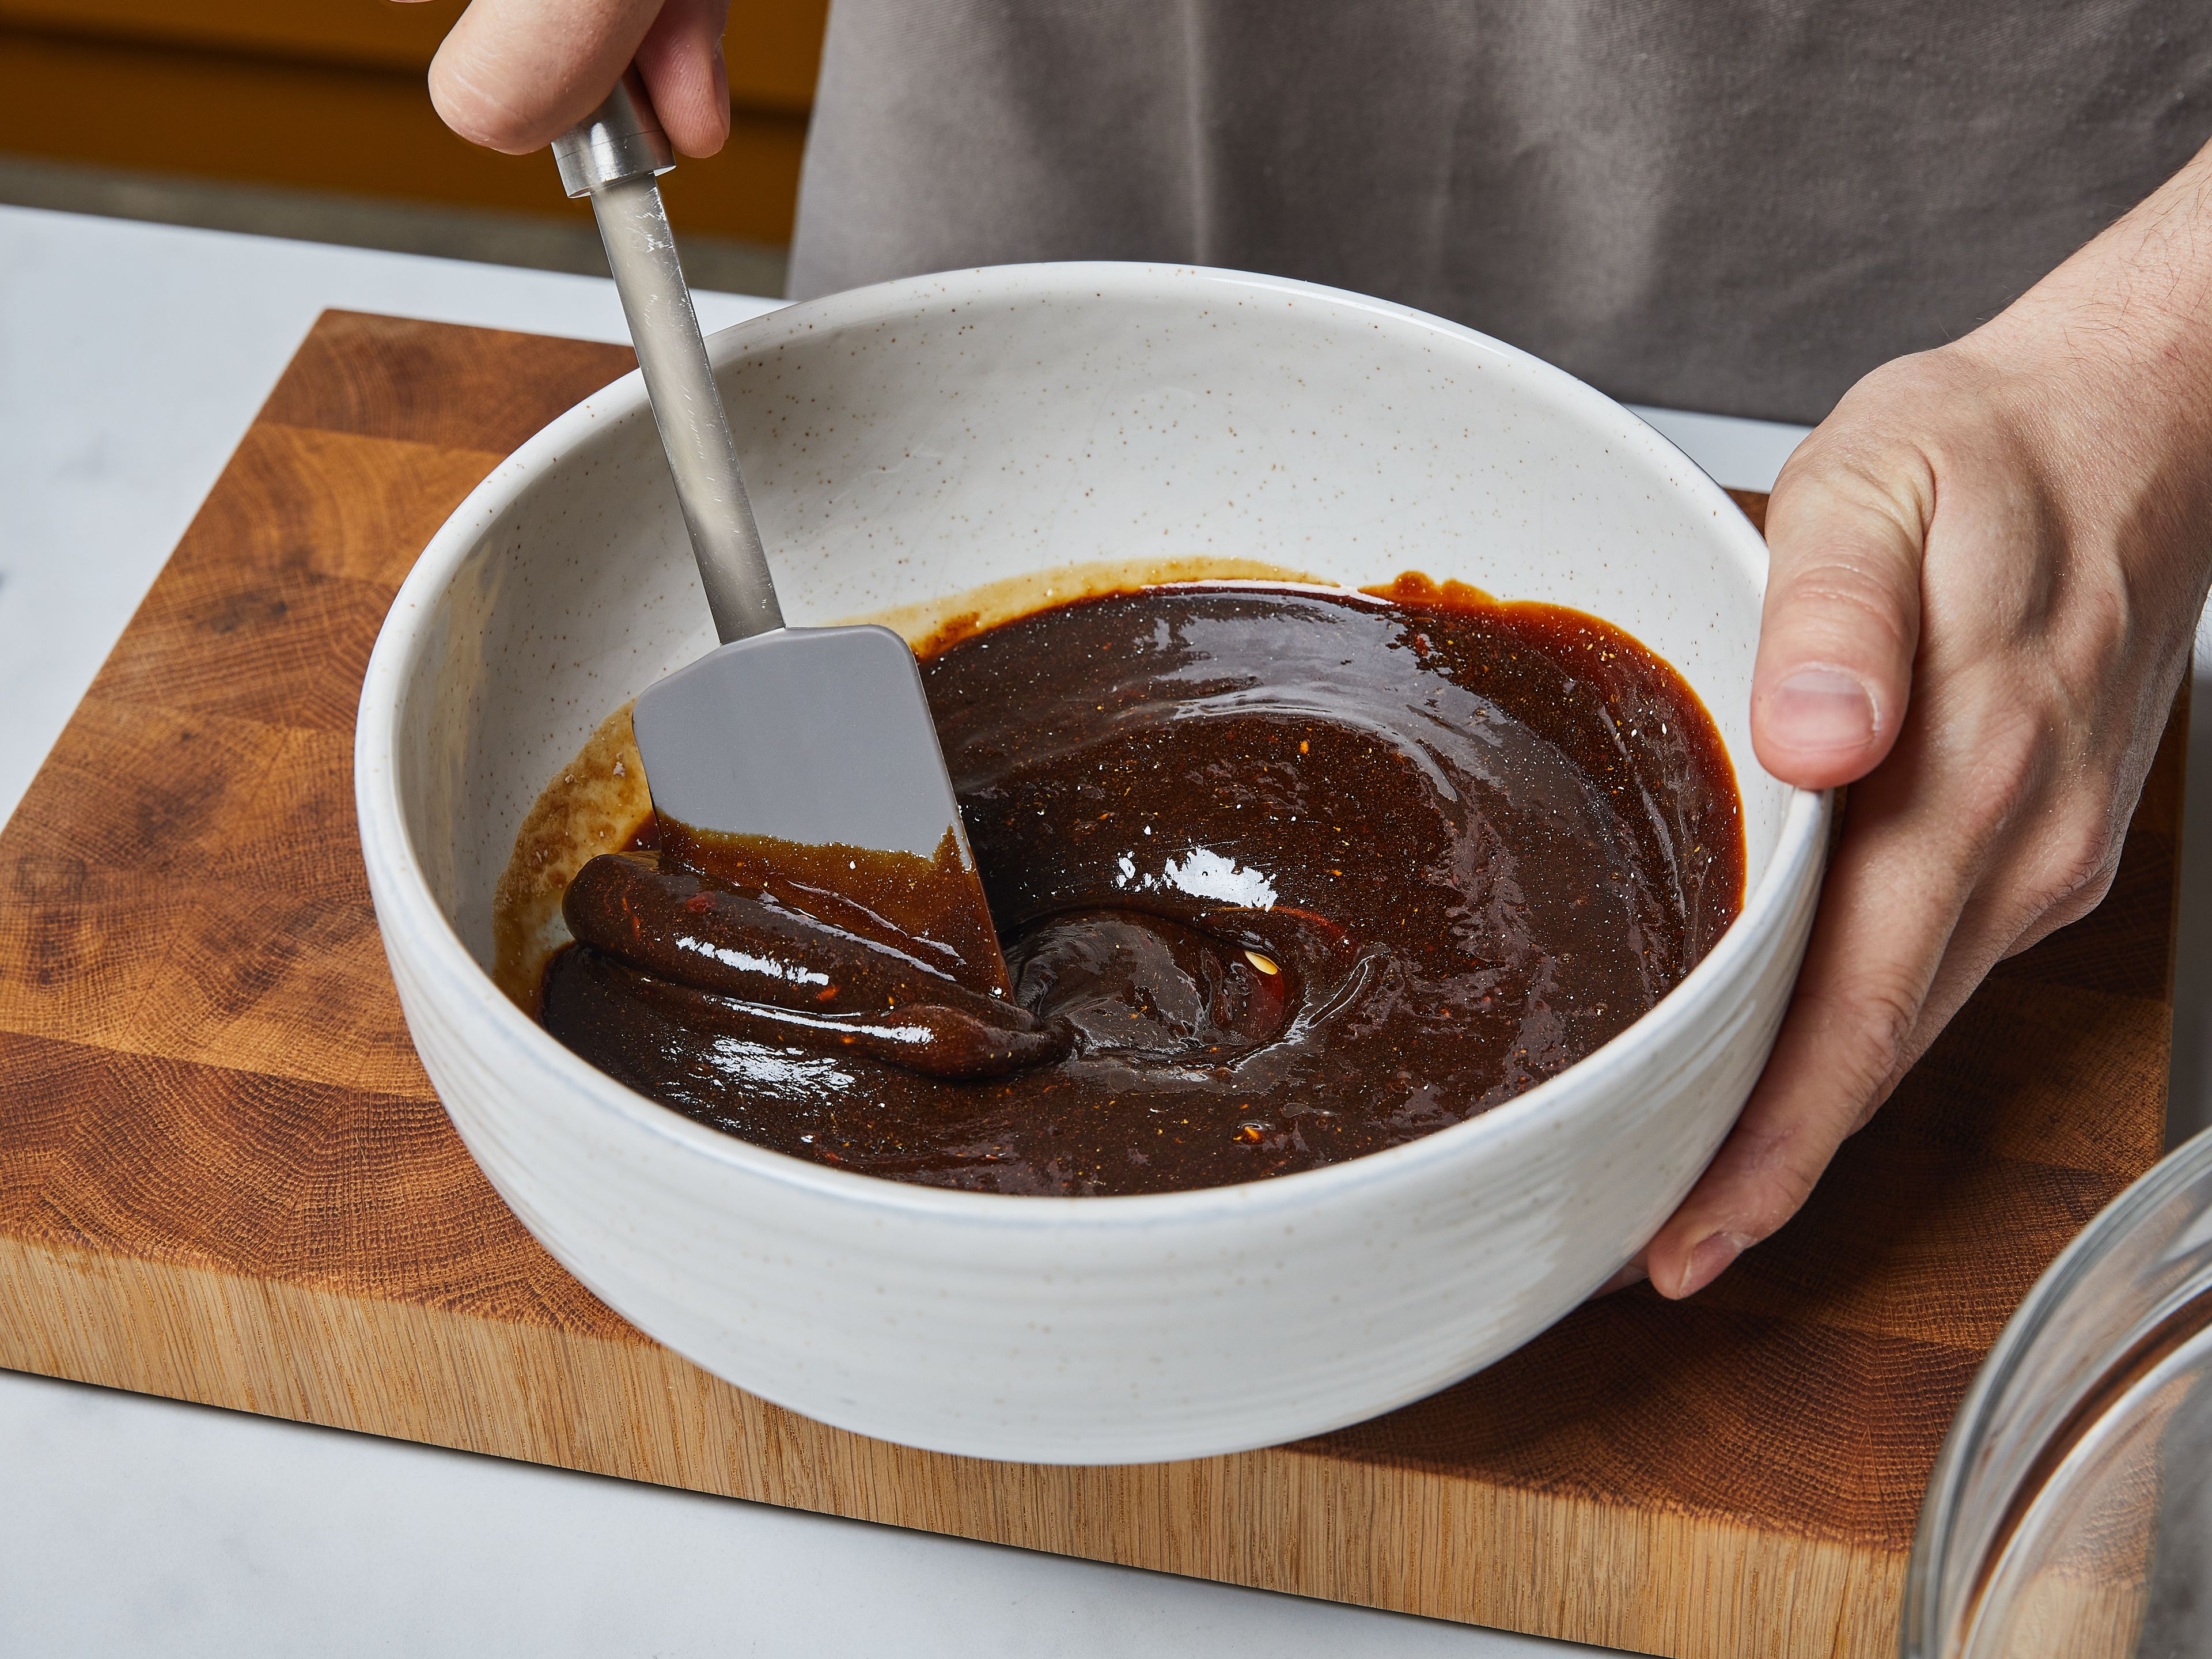 Mix flour, salt and gingerbread spice in a large bowl. In another large bowl, mix together the room temperature margarine, golden syrup, and applesauce until well combined.